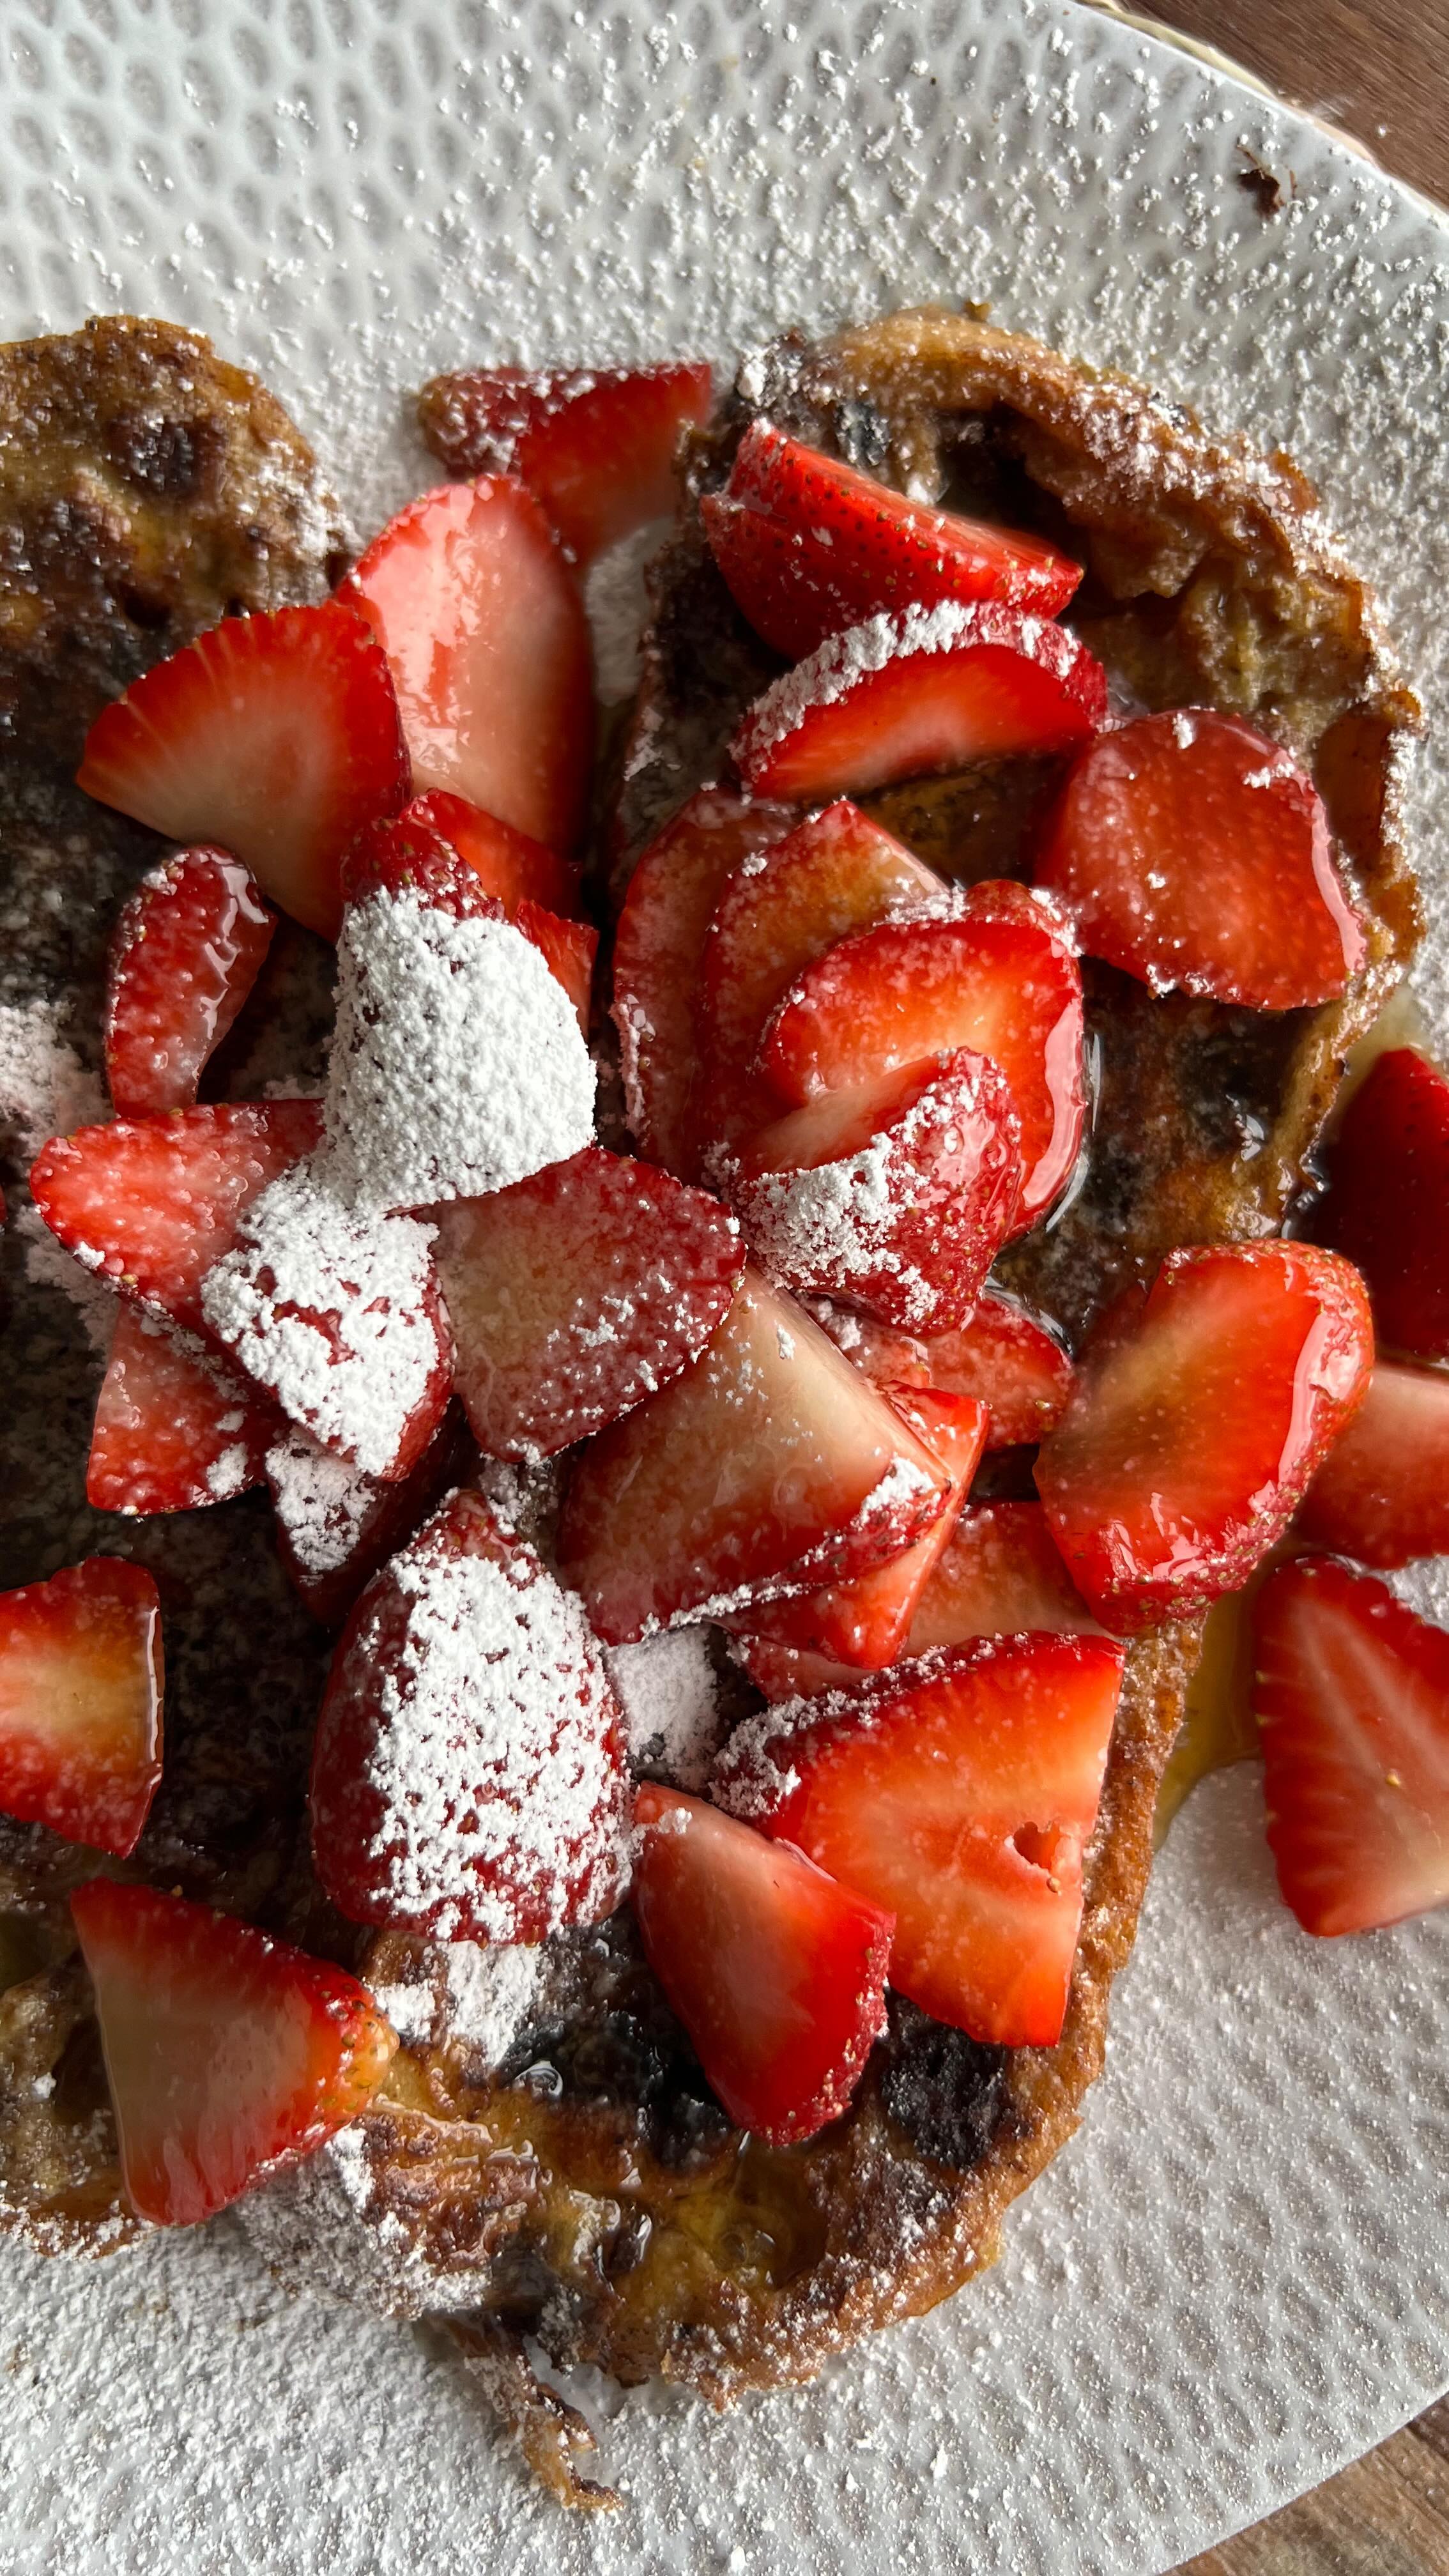 Comment RECIPE LINKS if you’d like the links to the recipes for this Chocolate Strawberry French Toast sent direct to yo